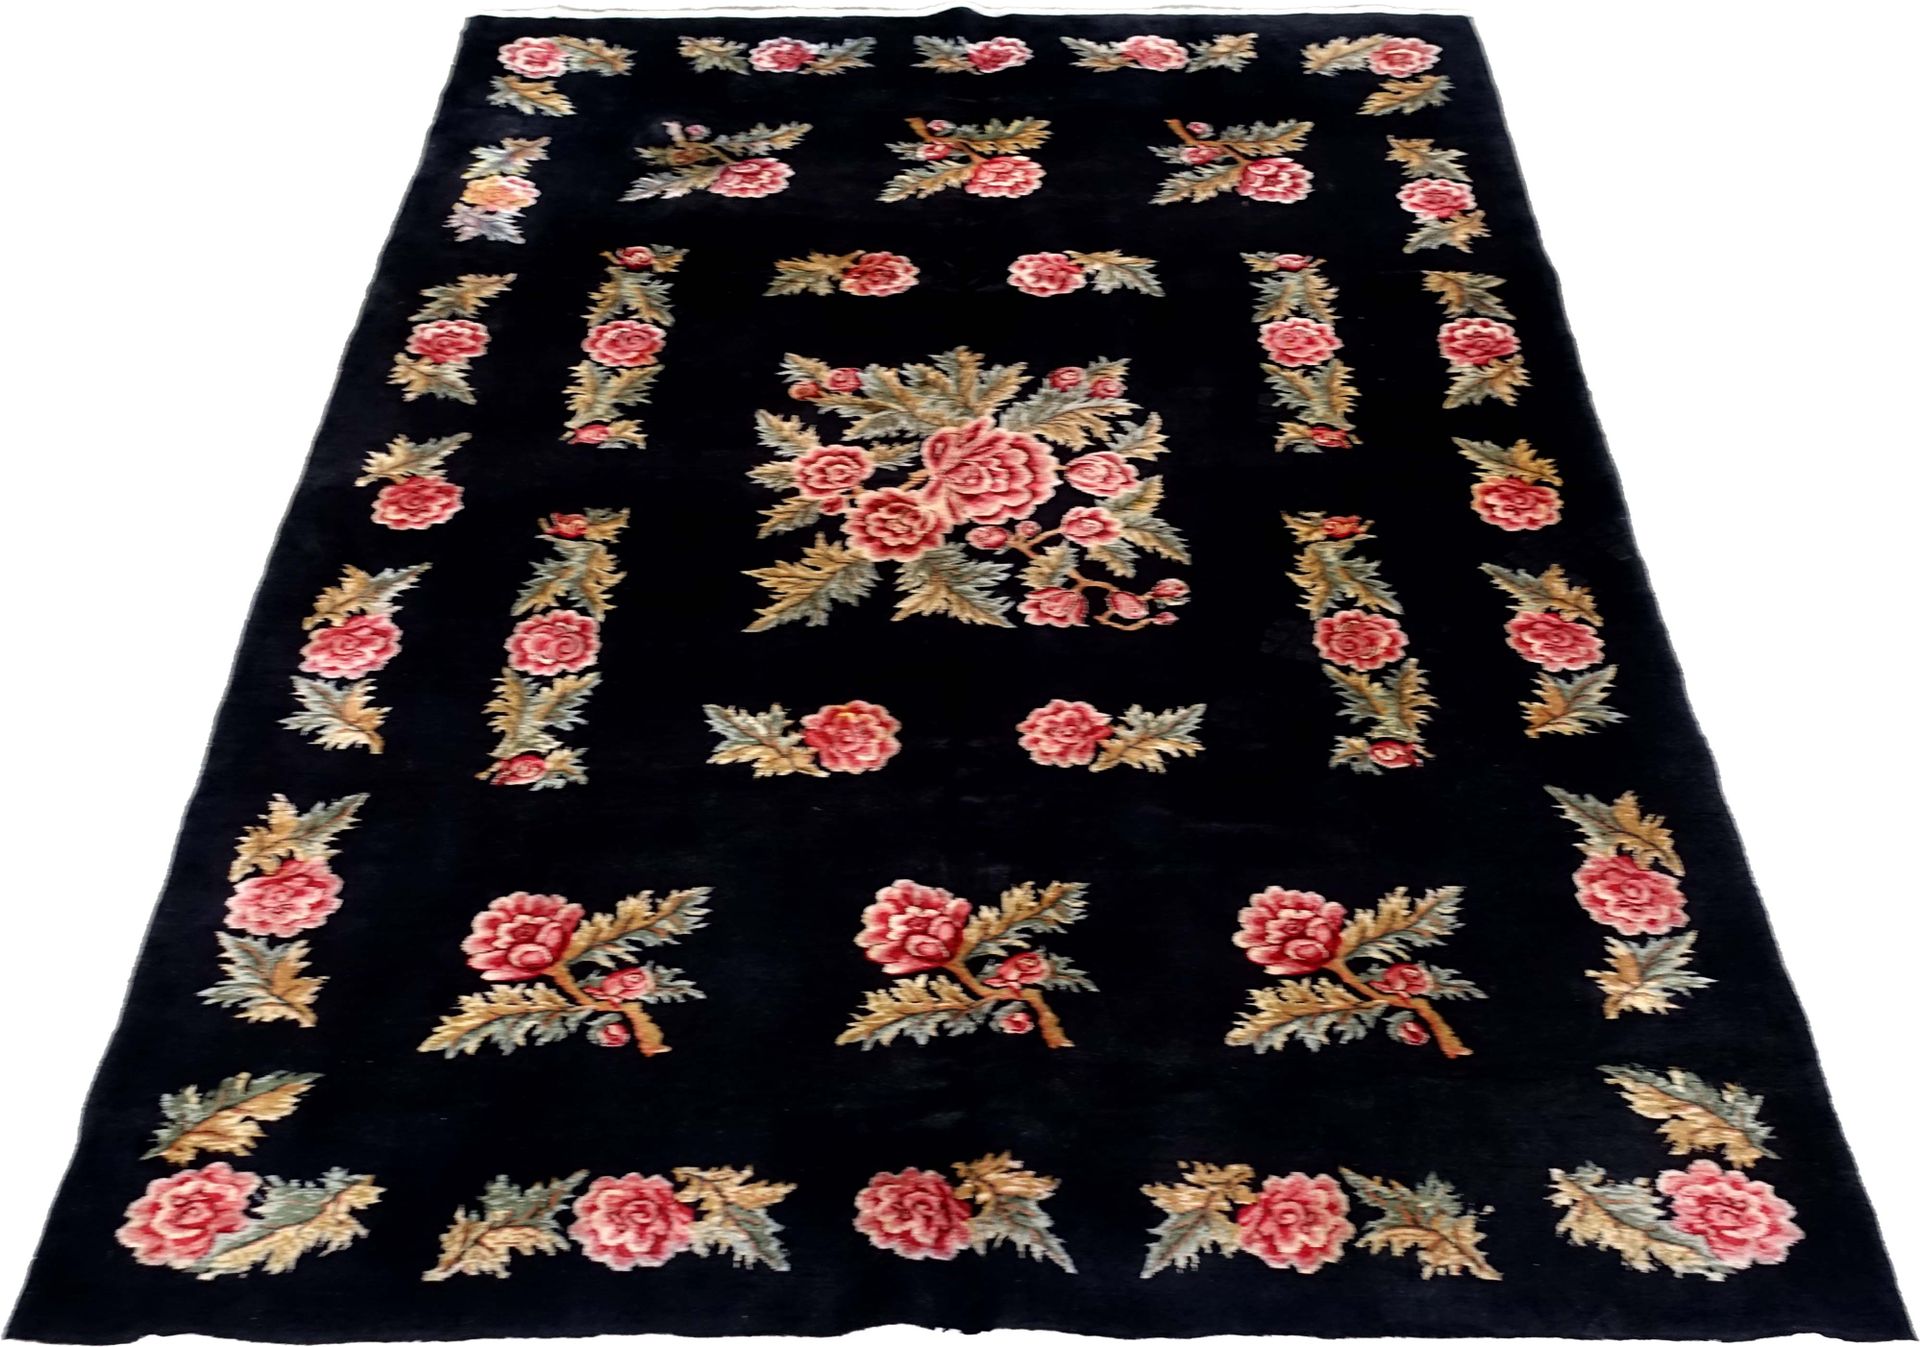 Tapis Ghoum. The background, plain black, presents bouquets of red flowers surro&hellip;